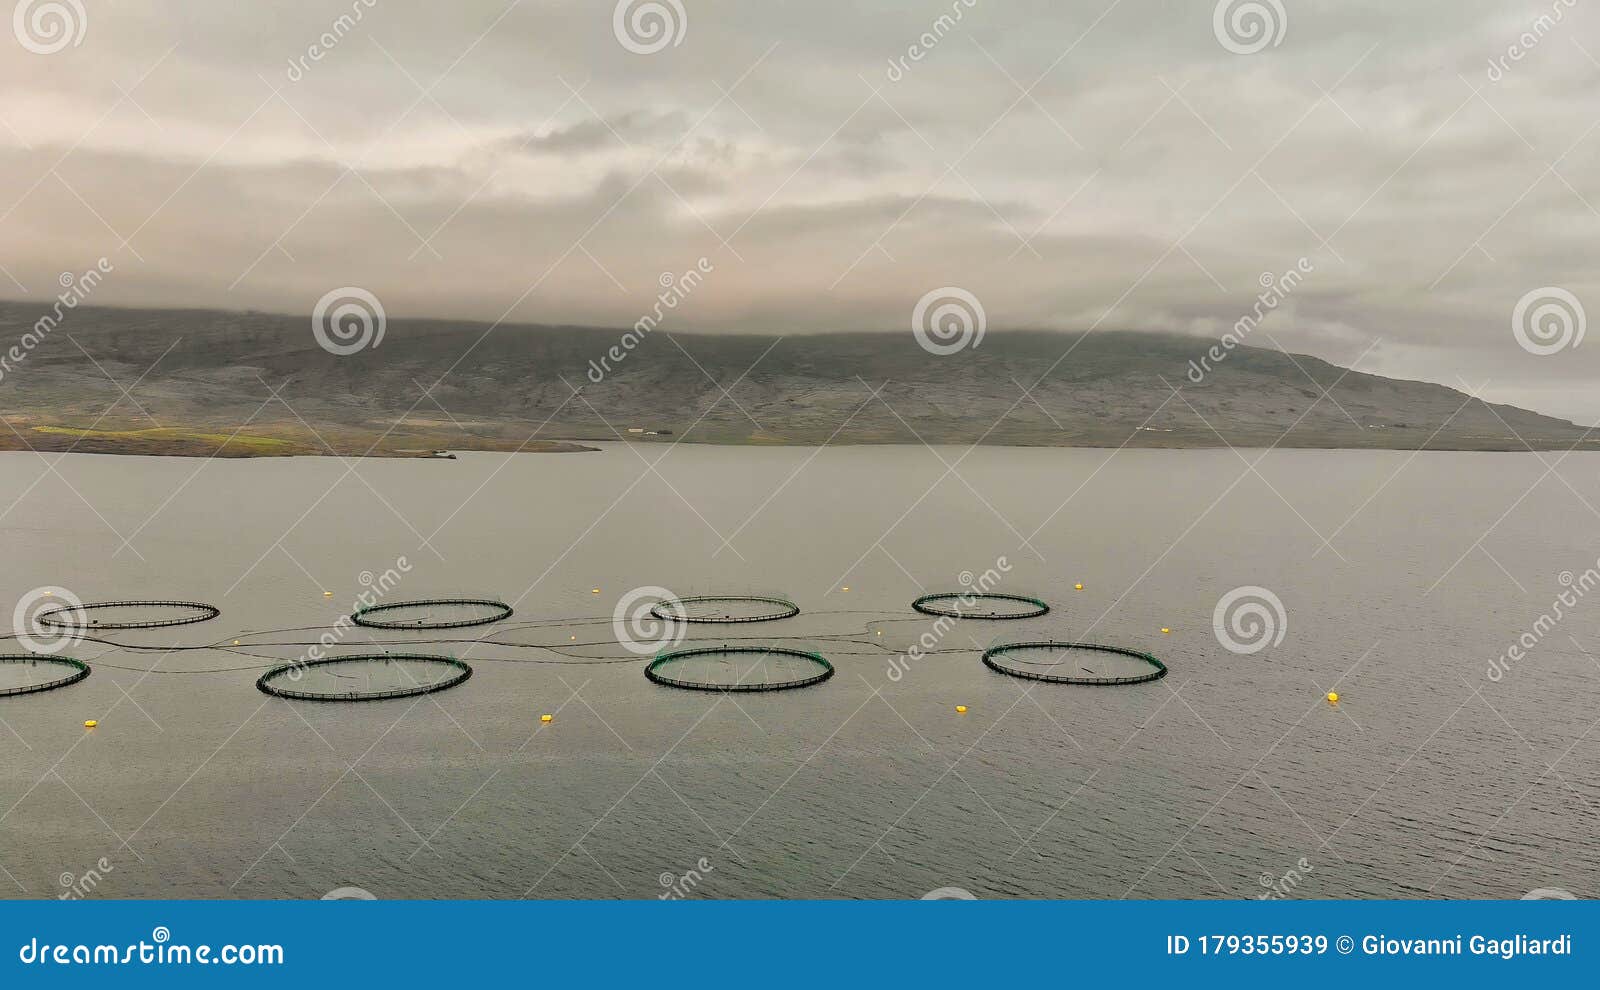 Sea Fish Farming in Round Net with Floating Cages in Iceland. Overhead  Aerial View of Aquaculture Salmon Fishing Farm Enclosure Stock Image -  Image of catfish, controlled: 179355939